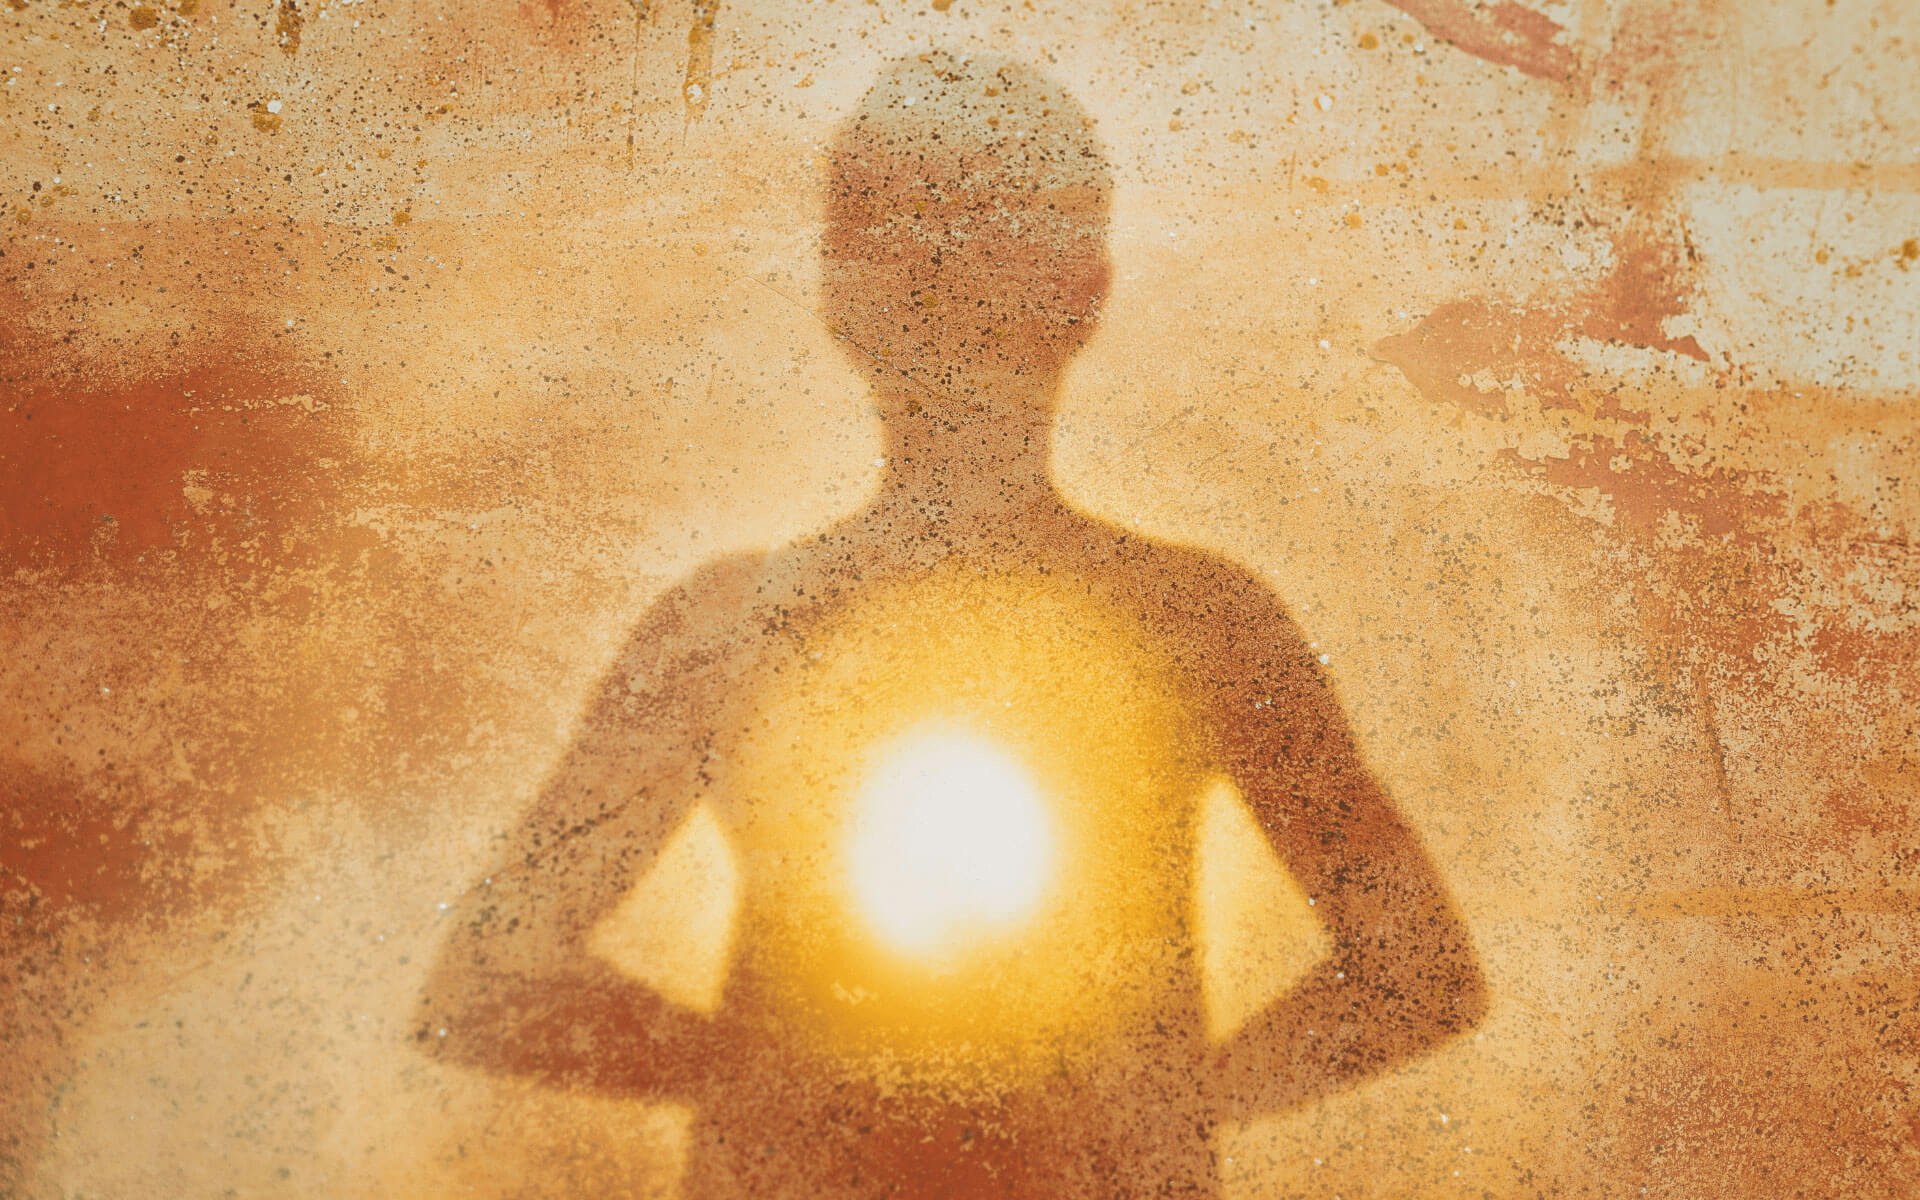 Shadow image of a person with a healing light in their middle